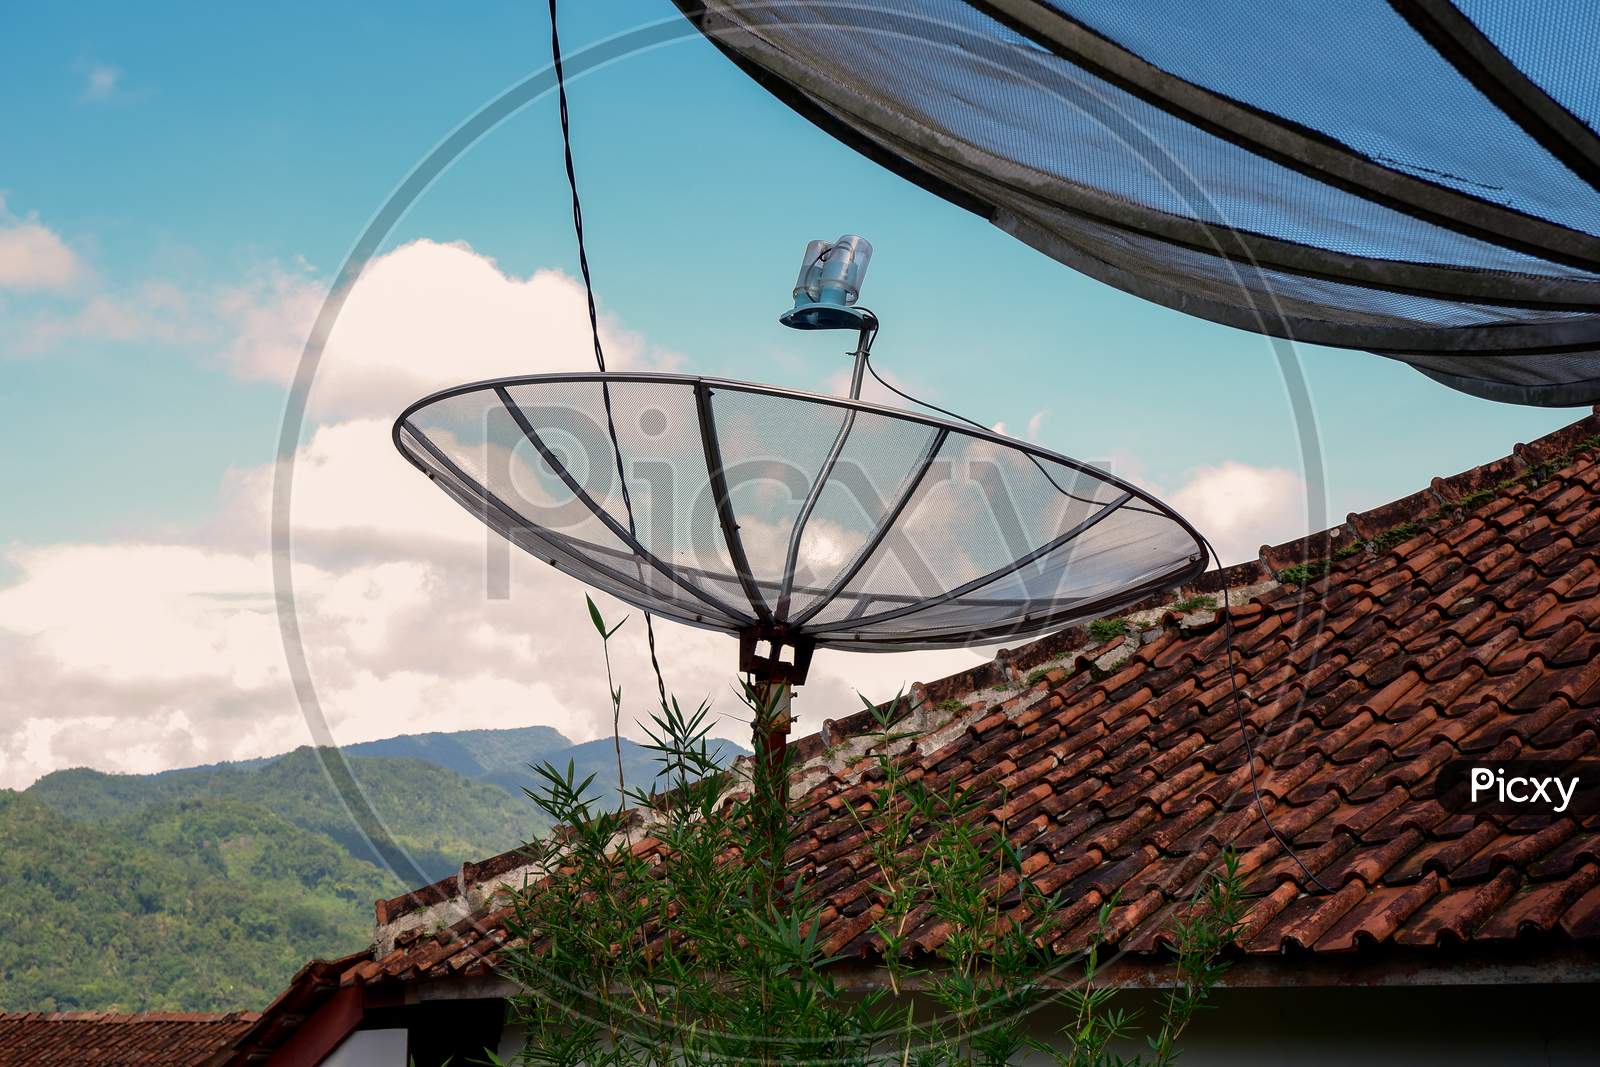 Old Parabolic Tv Broadcasts In The Countryside